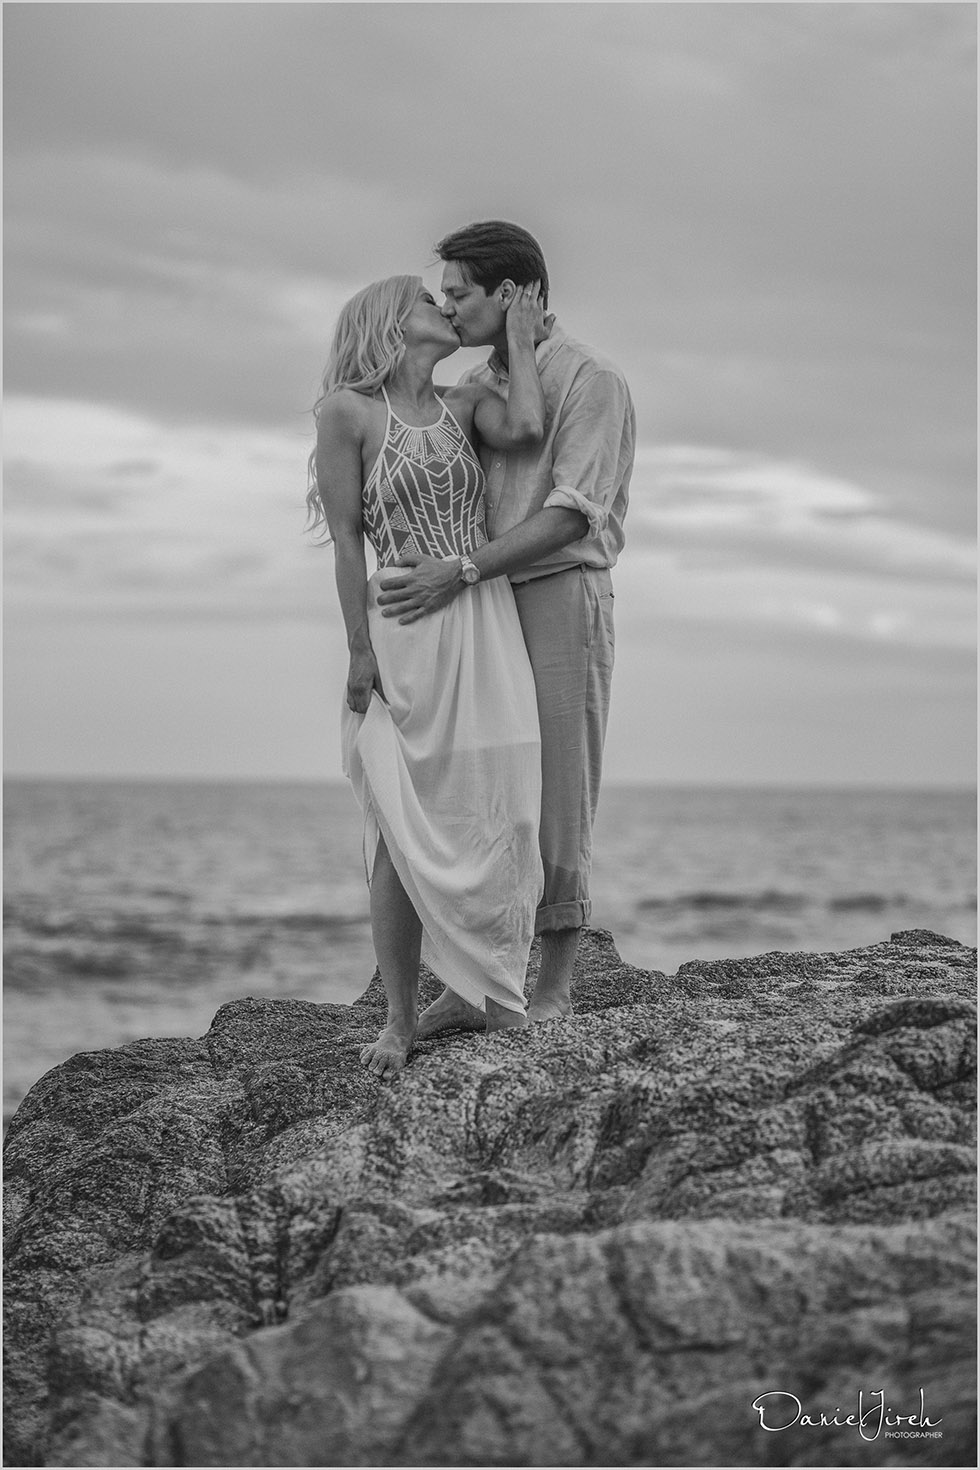 Engagement Photo Session in Cabo San Lucas, Mexico